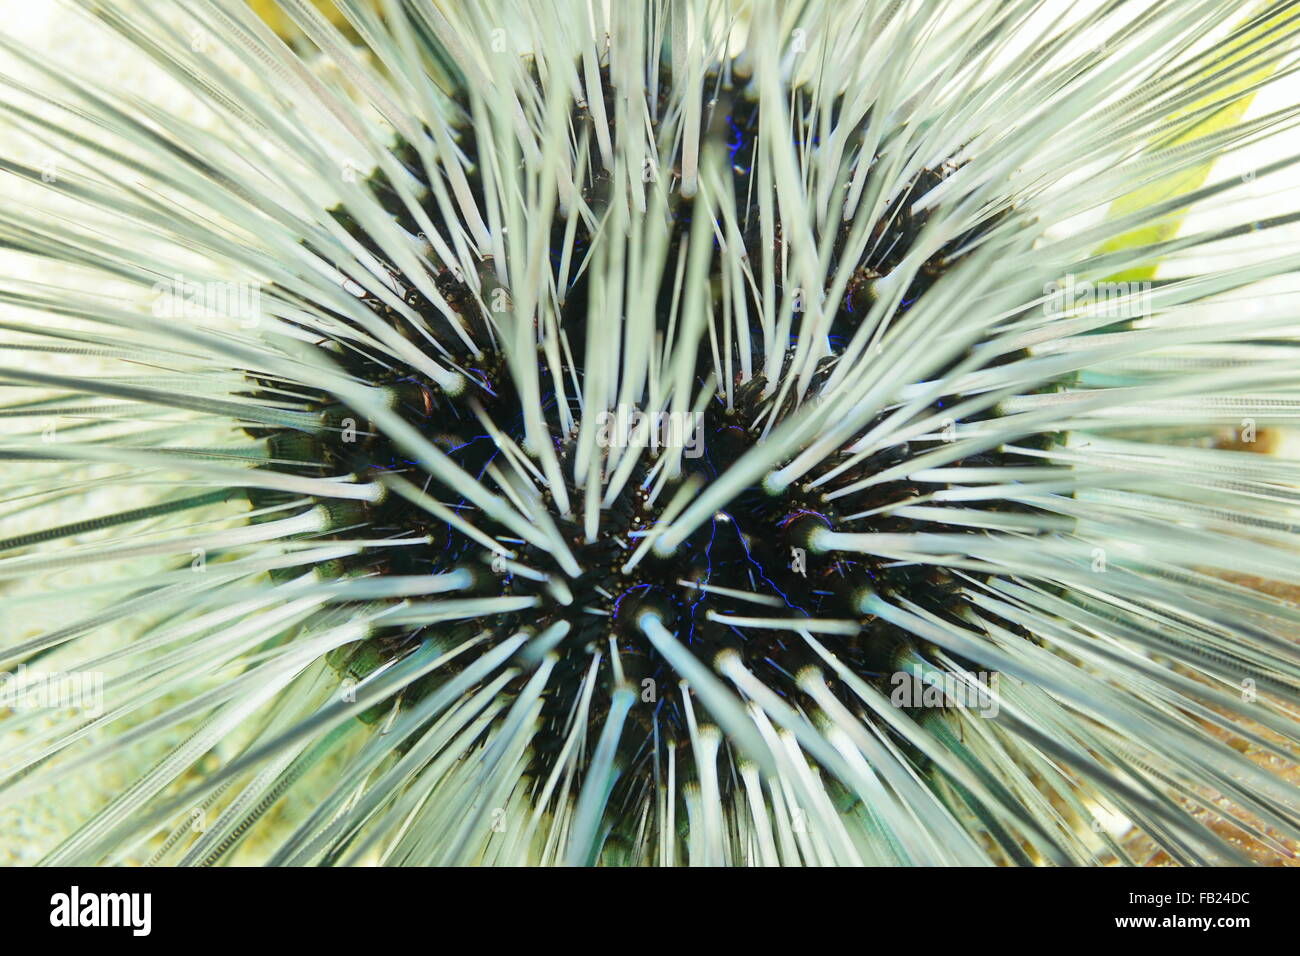 Underwater life, close up view of a long spined urchin, Diadema antillarum, with white spines and blue lines, Caribbean sea Stock Photo